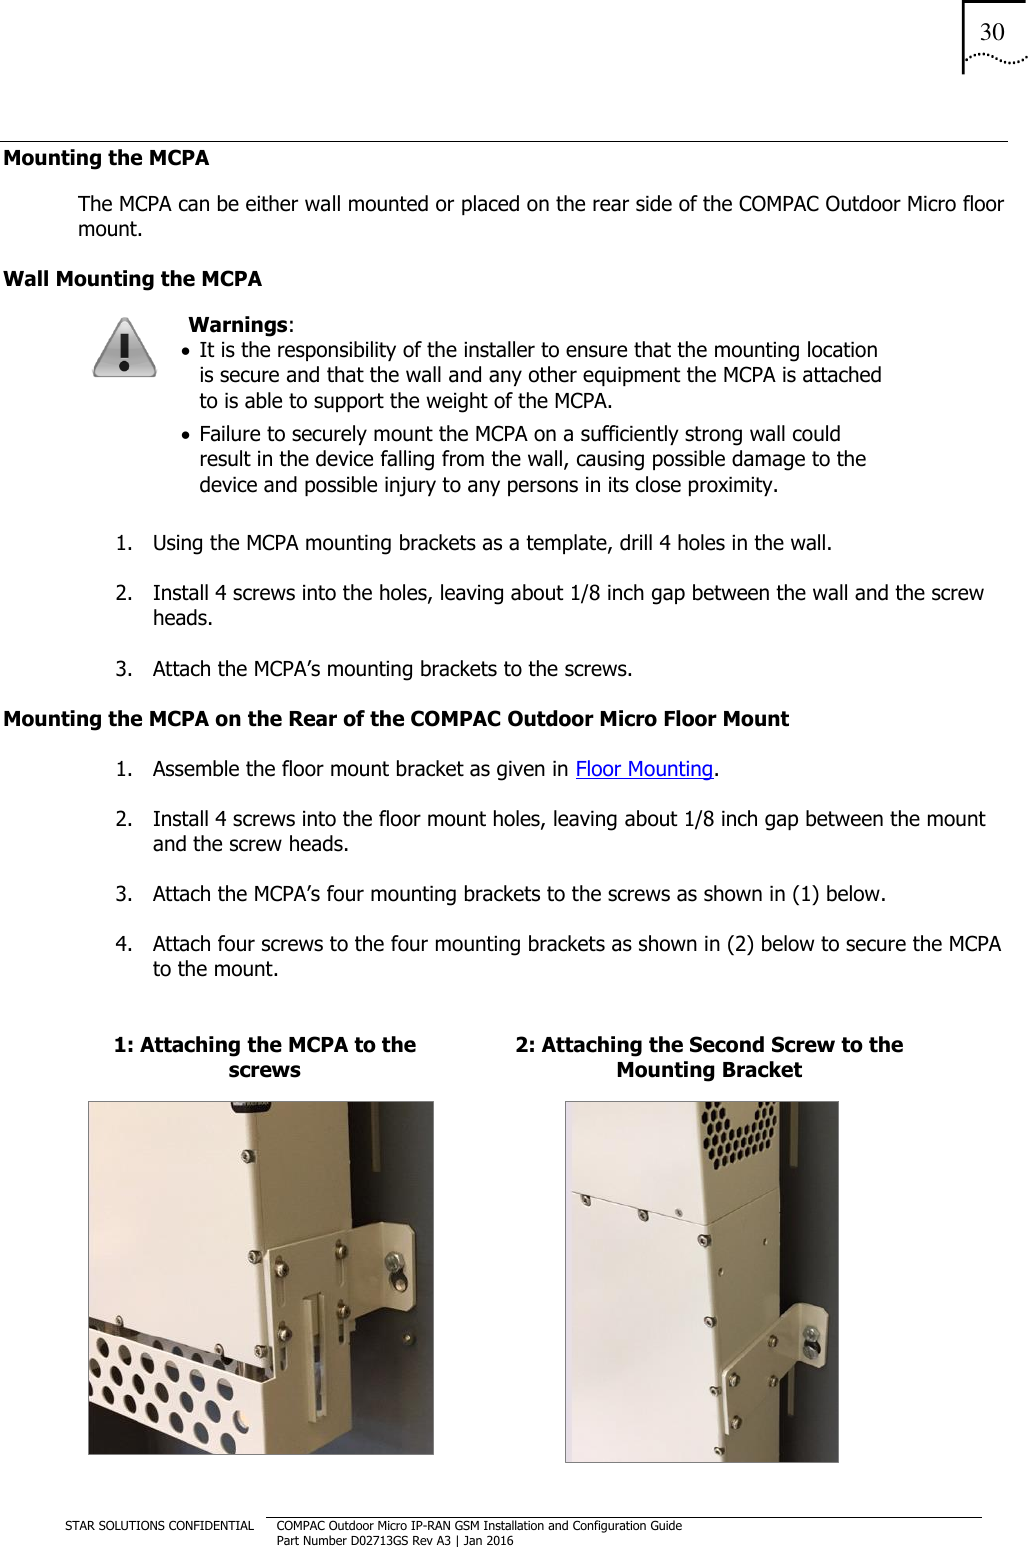 30  STAR SOLUTIONS CONFIDENTIAL COMPAC Outdoor Micro IP-RAN GSM Installation and Configuration Guide Part Number D02713GS Rev A3 | Jan 2016  Mounting the MCPA   The MCPA can be either wall mounted or placed on the rear side of the COMPAC Outdoor Micro floor mount. Wall Mounting the MCPA  Warnings:   It is the responsibility of the installer to ensure that the mounting location is secure and that the wall and any other equipment the MCPA is attached to is able to support the weight of the MCPA.   Failure to securely mount the MCPA on a sufficiently strong wall could result in the device falling from the wall, causing possible damage to the device and possible injury to any persons in its close proximity. 1. Using the MCPA mounting brackets as a template, drill 4 holes in the wall.  2. Install 4 screws into the holes, leaving about 1/8 inch gap between the wall and the screw heads. 3. Attach the MCPA’s mounting brackets to the screws. Mounting the MCPA on the Rear of the COMPAC Outdoor Micro Floor Mount 1. Assemble the floor mount bracket as given in Floor Mounting. 2. Install 4 screws into the floor mount holes, leaving about 1/8 inch gap between the mount and the screw heads. 3. Attach the MCPA’s four mounting brackets to the screws as shown in (1) below. 4. Attach four screws to the four mounting brackets as shown in (2) below to secure the MCPA to the mount.  1: Attaching the MCPA to the screws 2: Attaching the Second Screw to the Mounting Bracket   